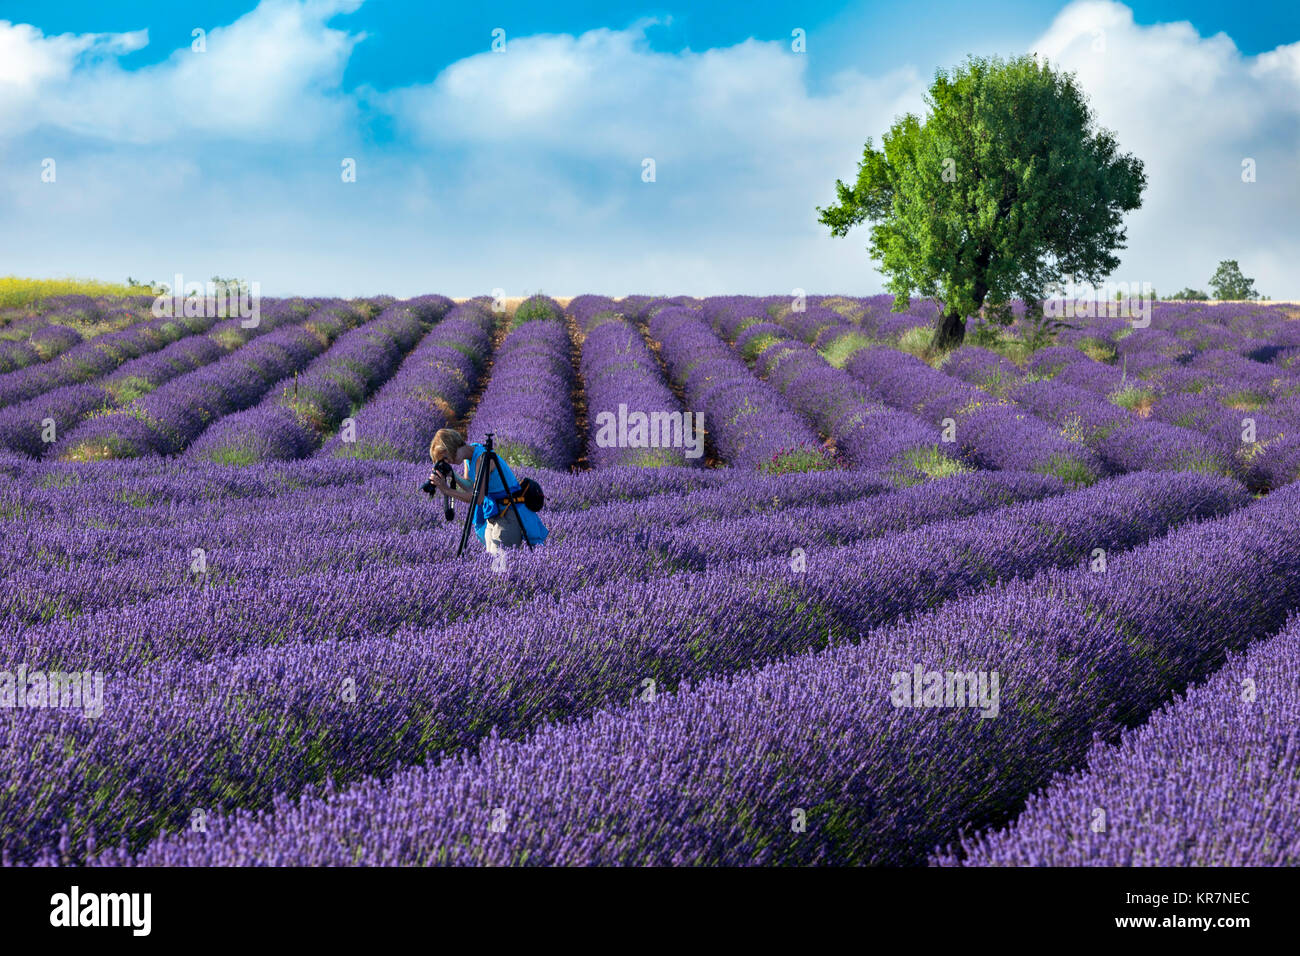 Photographer in rows of lavender along the Valensole Plateau, Alpes- de-Haute-Provence, Provence France Stock Photo